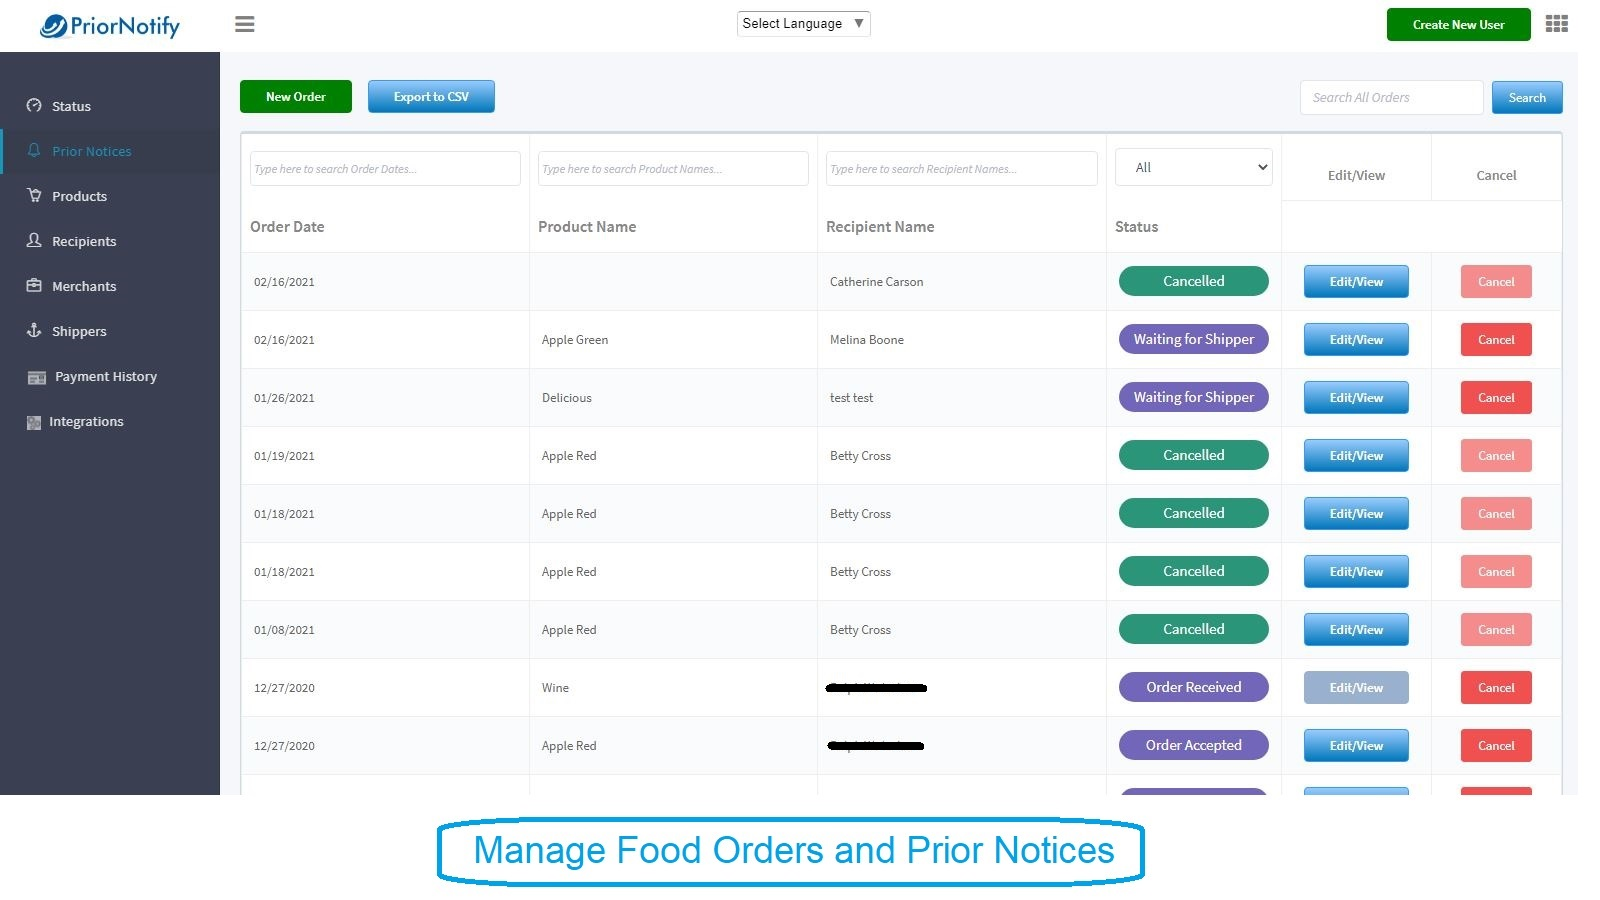 Manage and organize your orders and related Prior Notices